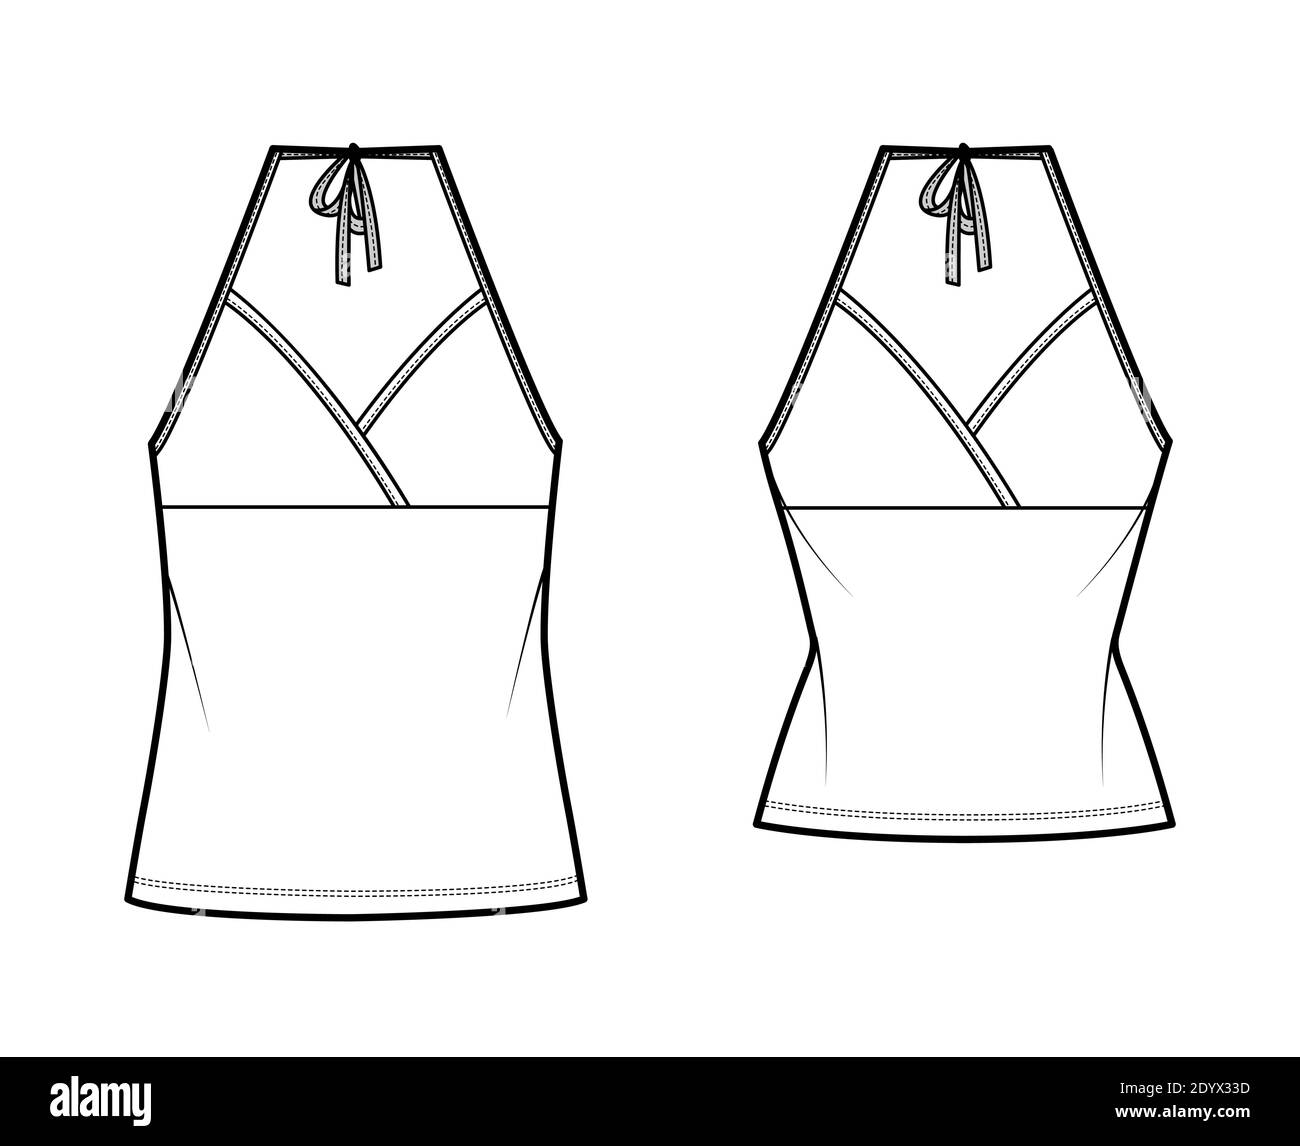 Set of Camisoles halter neck surplice tanks technical fashion illustration with empire seam, bow, slim, oversized fit, tunic length. Flat top template front, white color. Women men CAD mockup Stock Vector